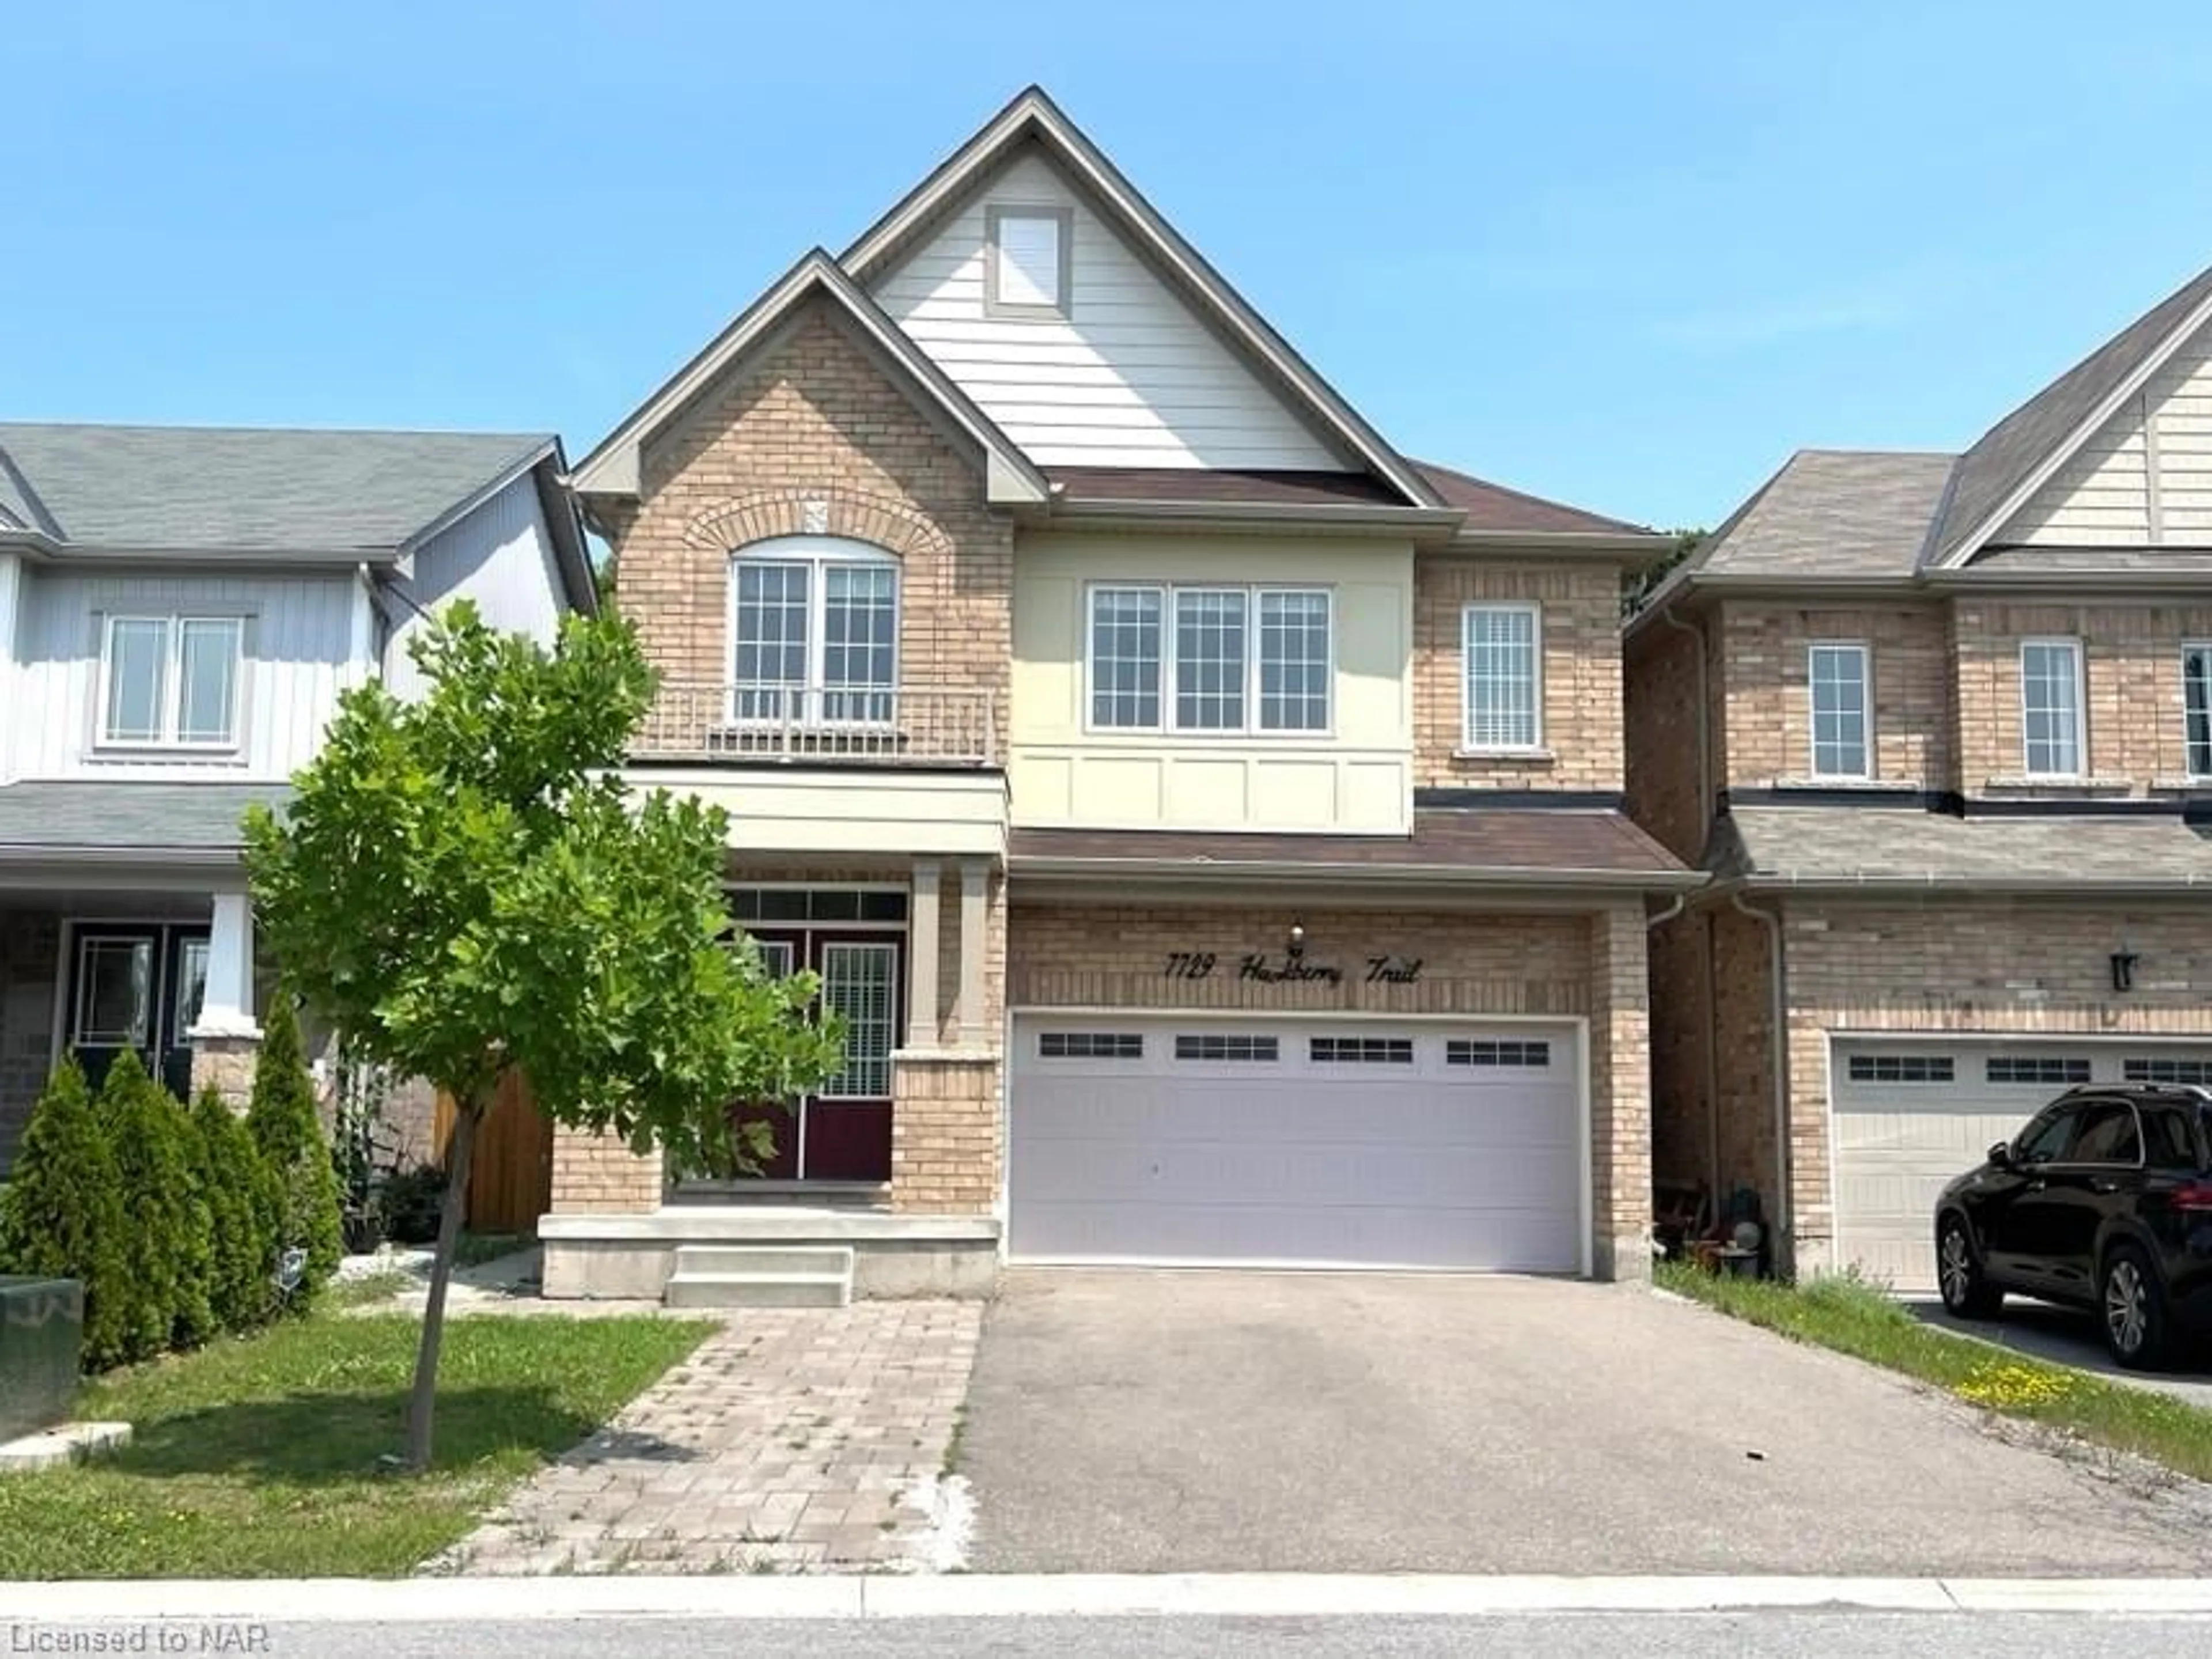 Frontside or backside of a home for 7729 Hackberry Trail, Niagara Falls Ontario L2H 3R5